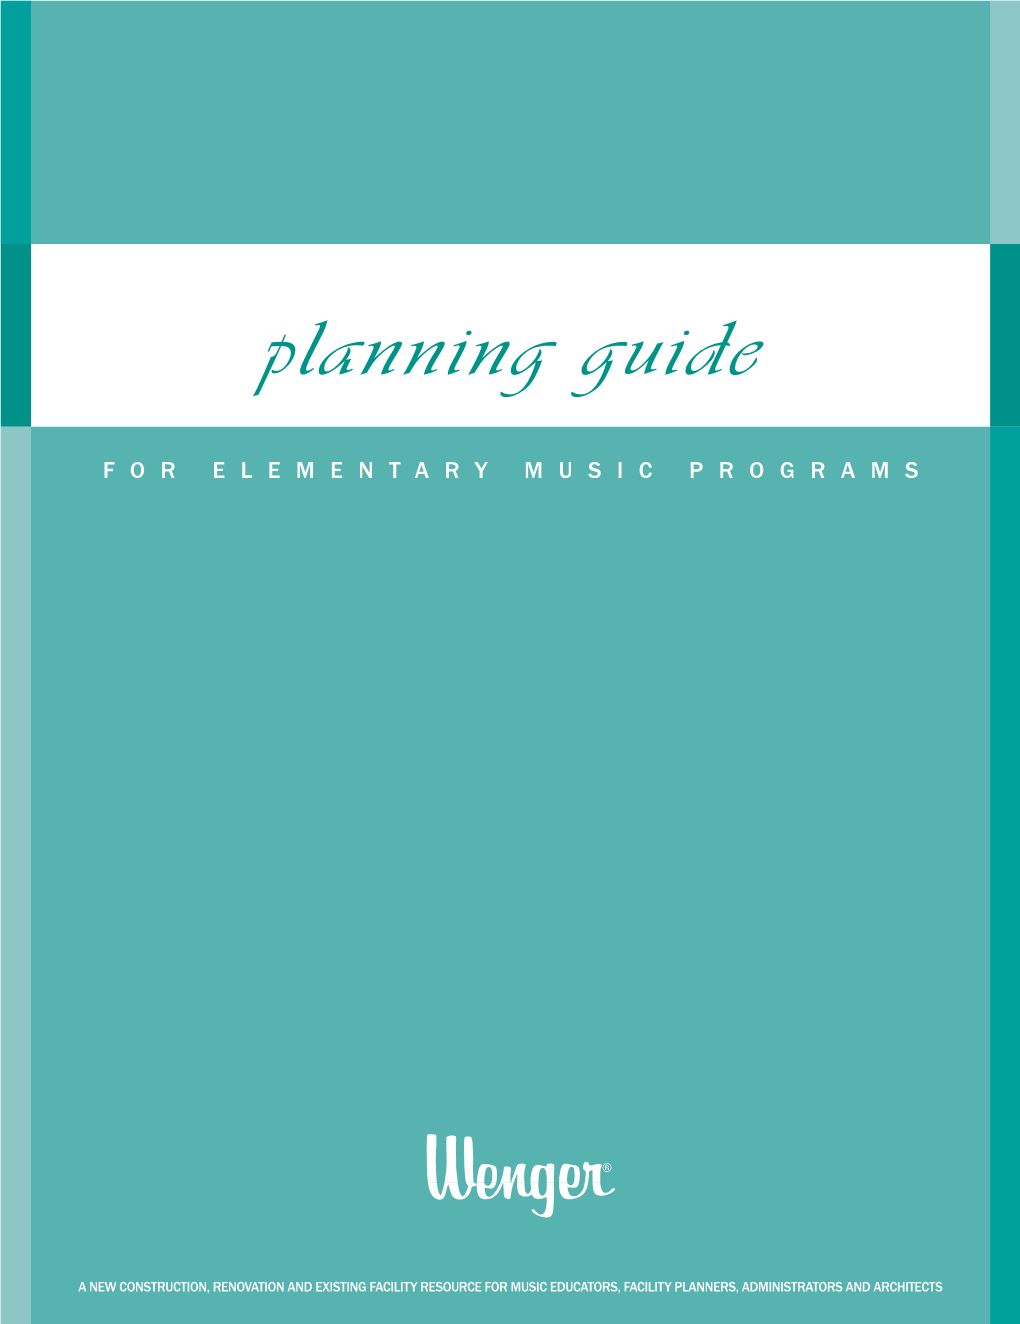 Planning Guide for Elementary Music Programs